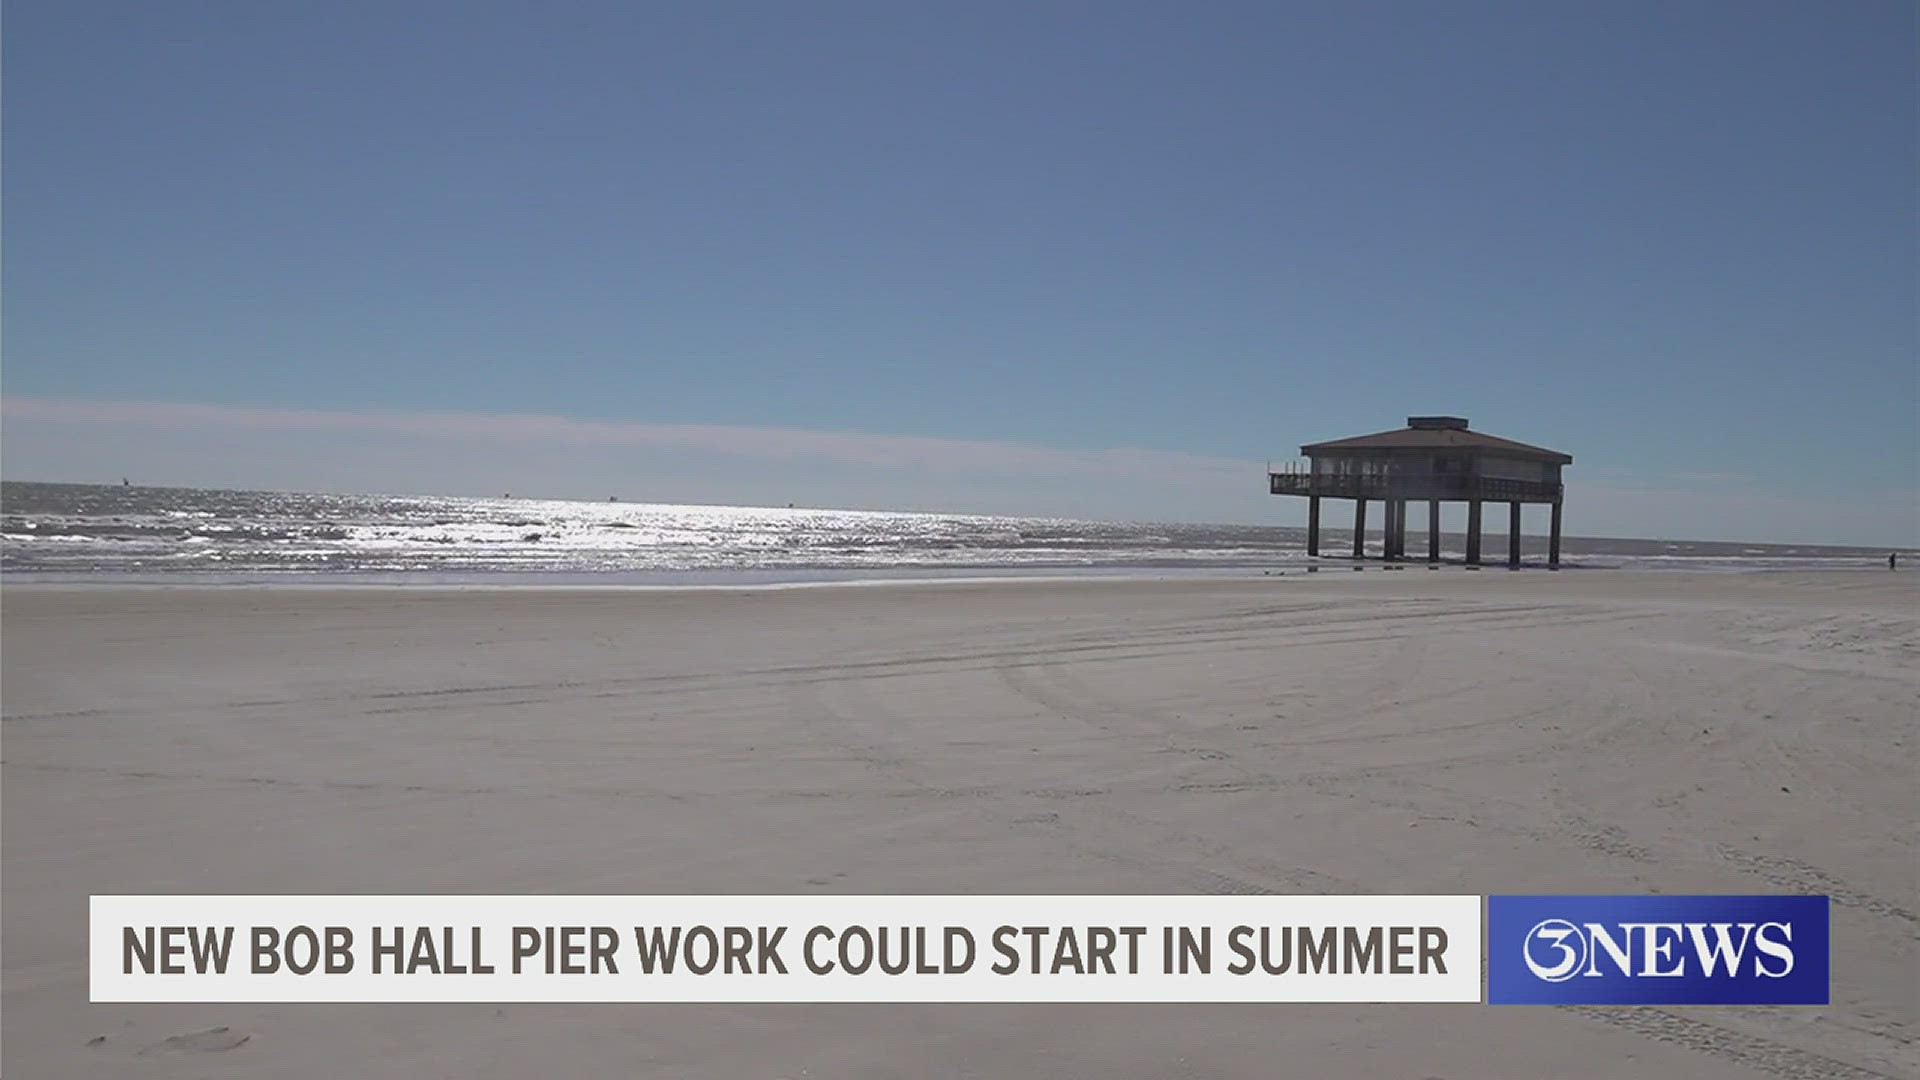 As previously reported, Nueces County will get blueprints of the new pier from engineers on Friday.